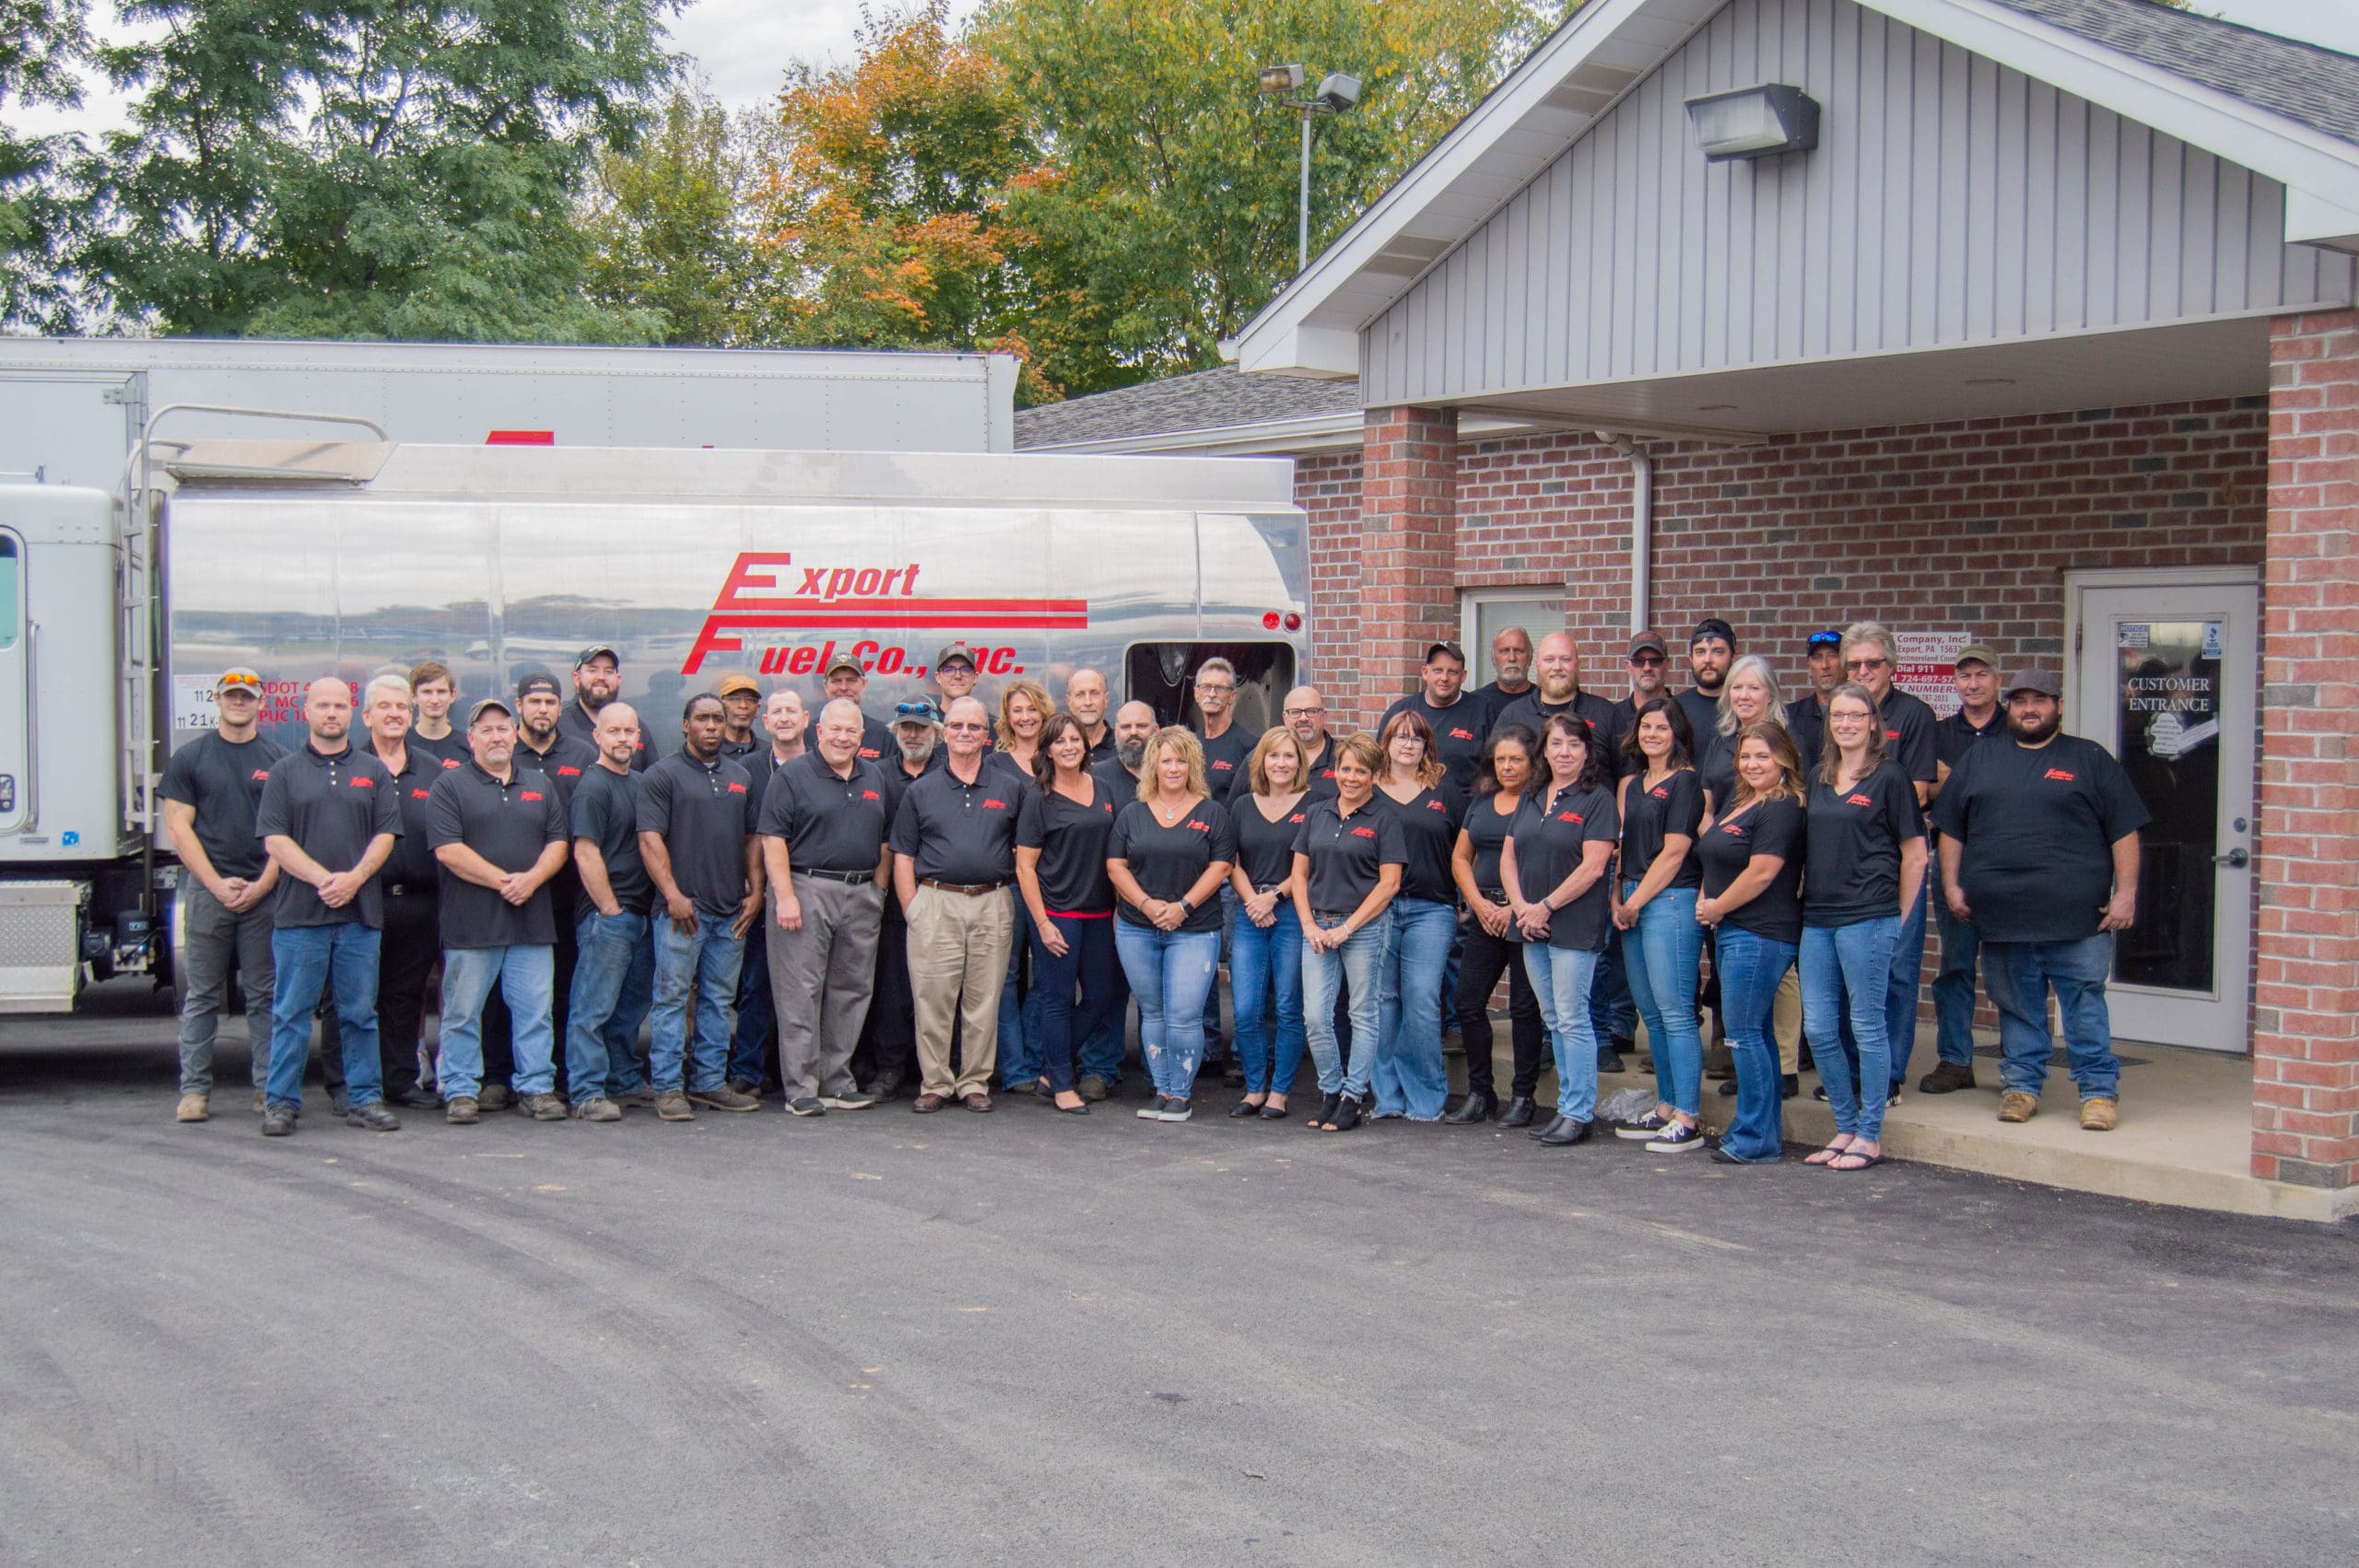 Export Fuel Co. Inc. full staff standing in front of the building and work trucks.